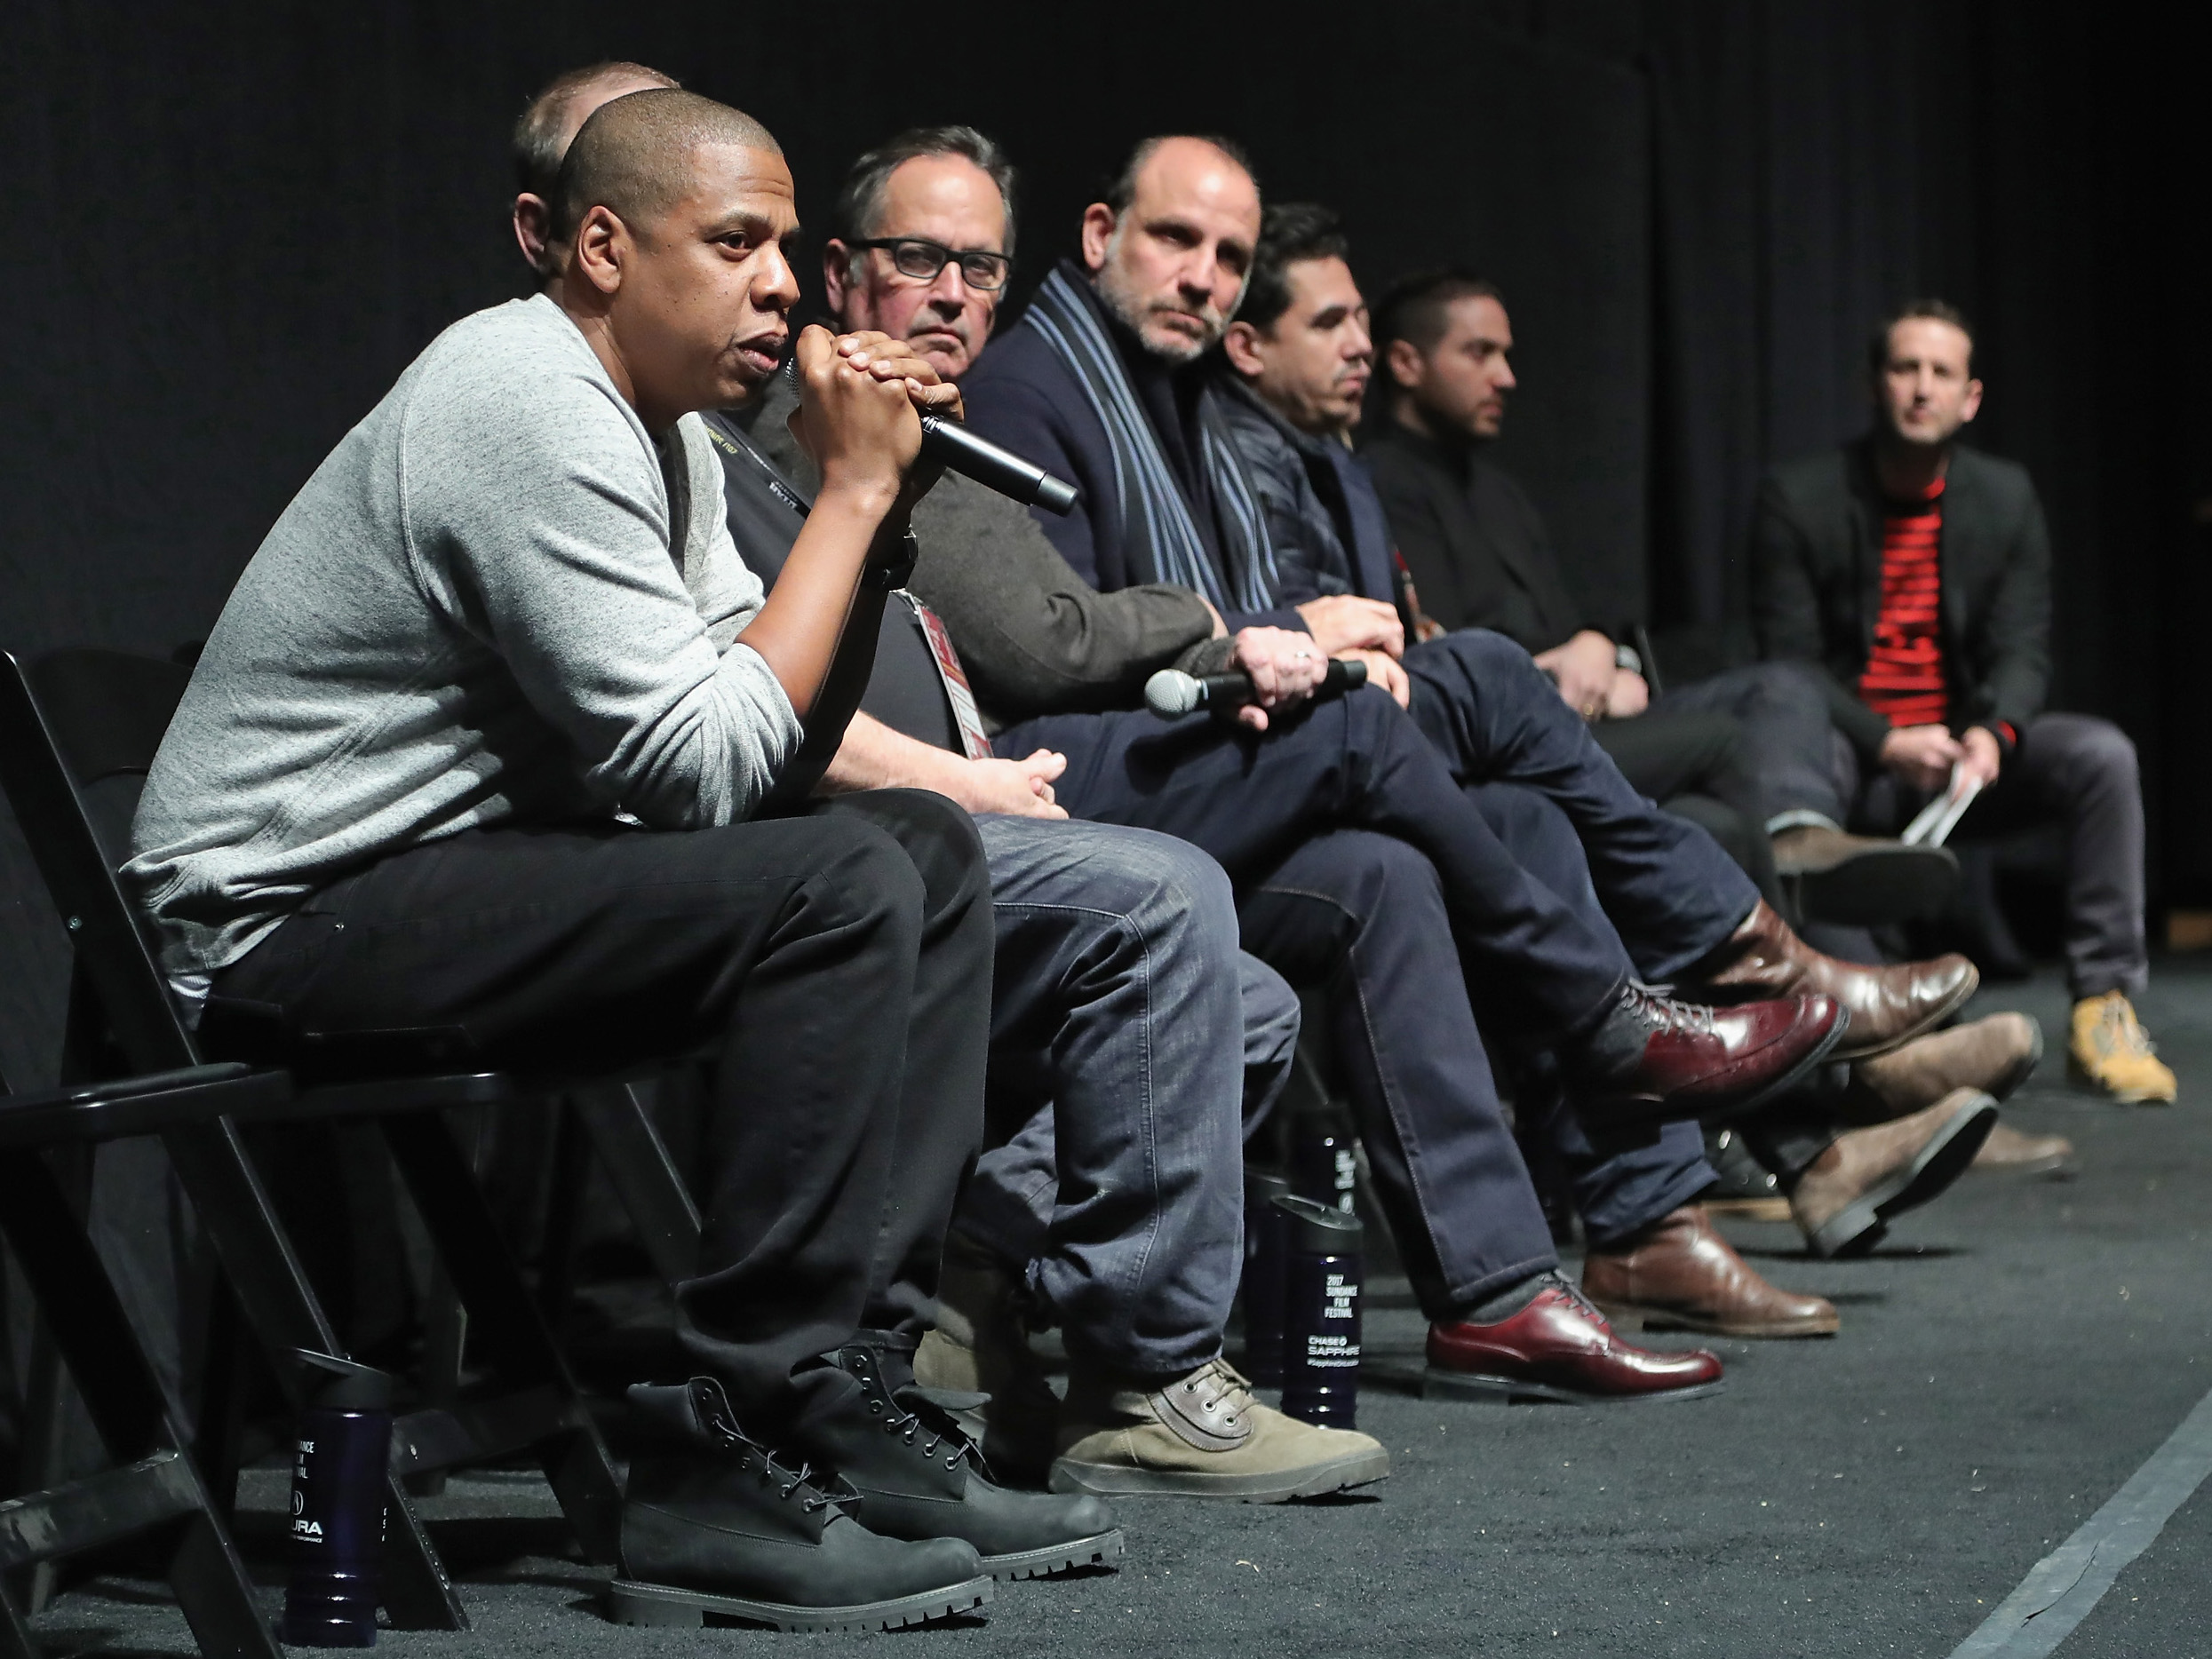 Jay Z speaks during a Q&A following the <i>TIME: The Kalief Browder Story</i> Sundance World Premiere, on Jan. 25, 2017 in Park City, Utah. (Neilson Barnard—Spike TV/Getty Images)